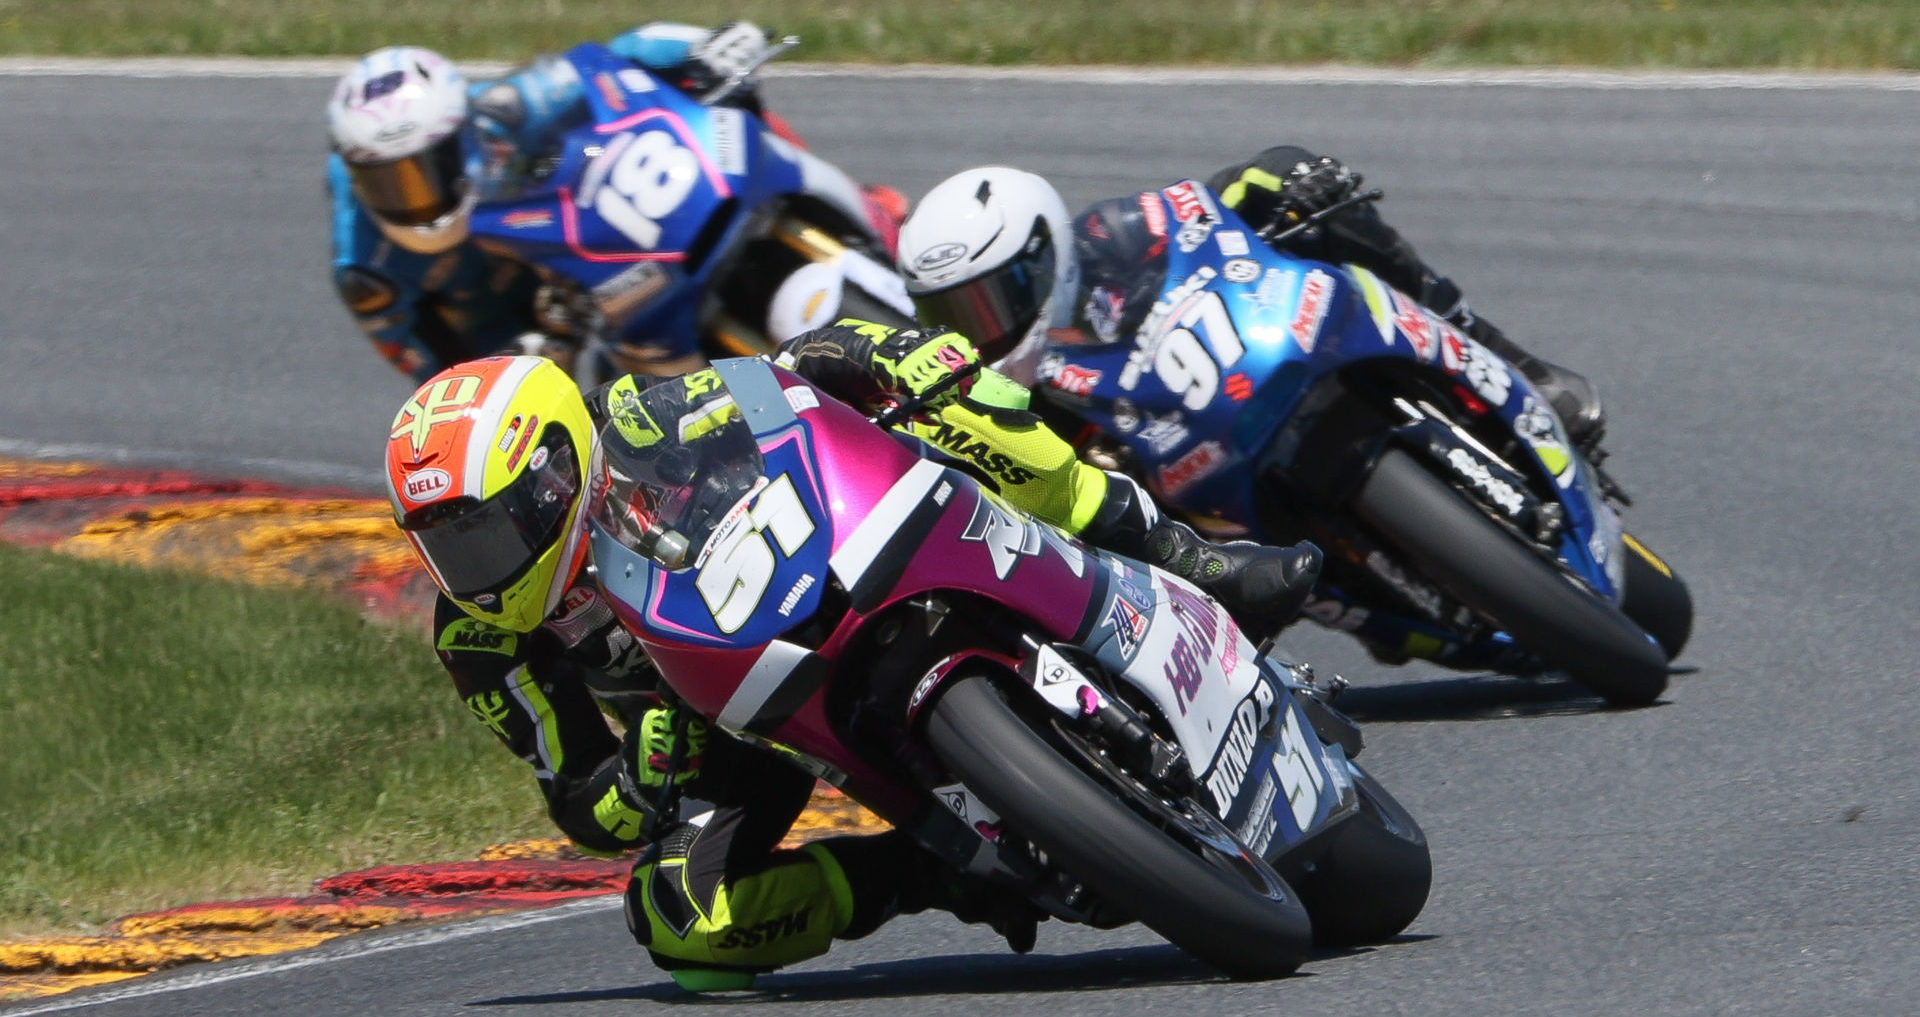 Kaleb De Keyrel (51), Rocco Landers (97), and Jackson Blackmon (18) race for the lead in MotoAmerica Twins Cup Race Two at Road America. Photo by Brian J. Nelson, courtesy MotoAmerica.